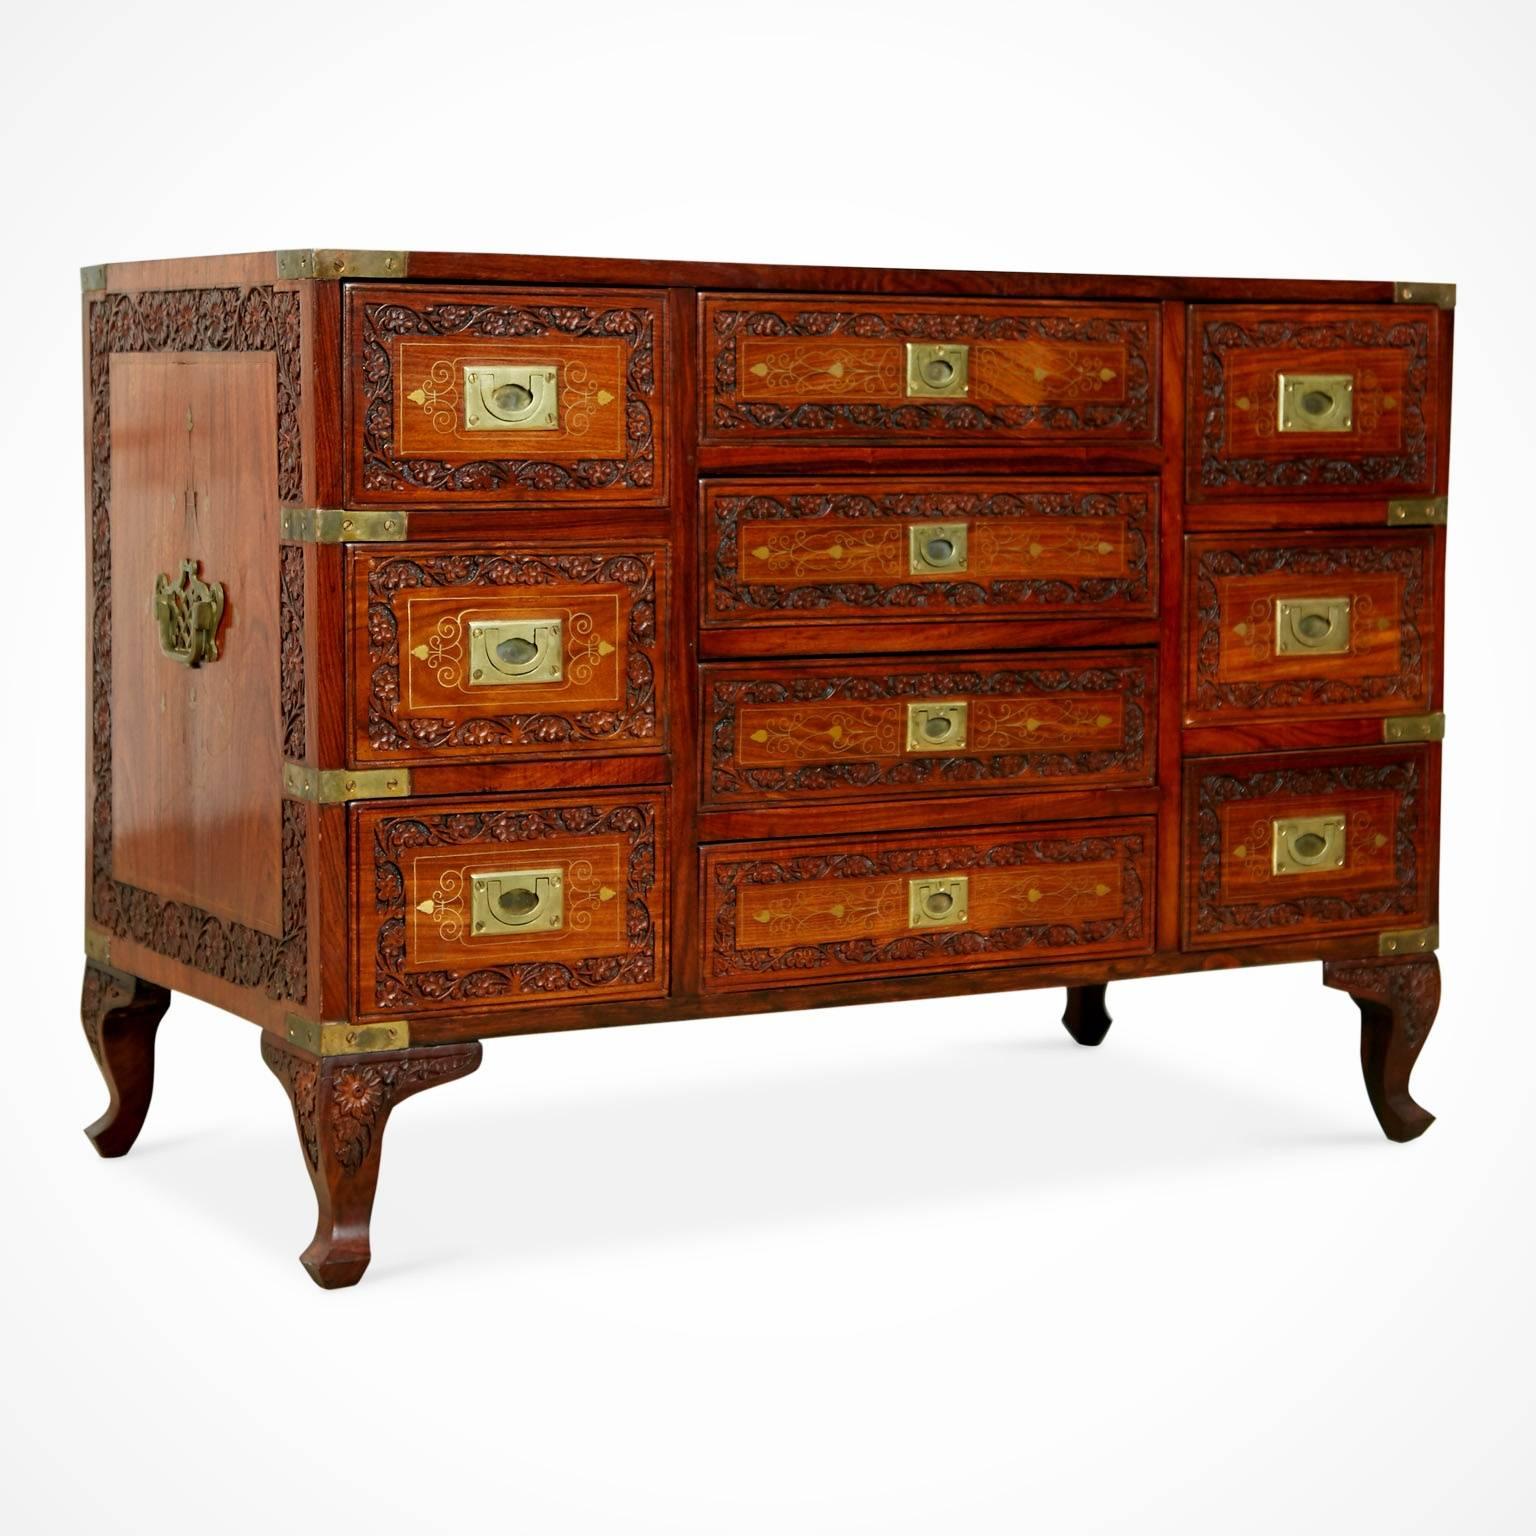 Intricately carved inlay Campaign dresser or chest with ten drawers. Fabricated from walnut which has an intrinsically carved floral border detail around the top, sides, cabriole legs and each individual drawer. This dresser features gleaming brass